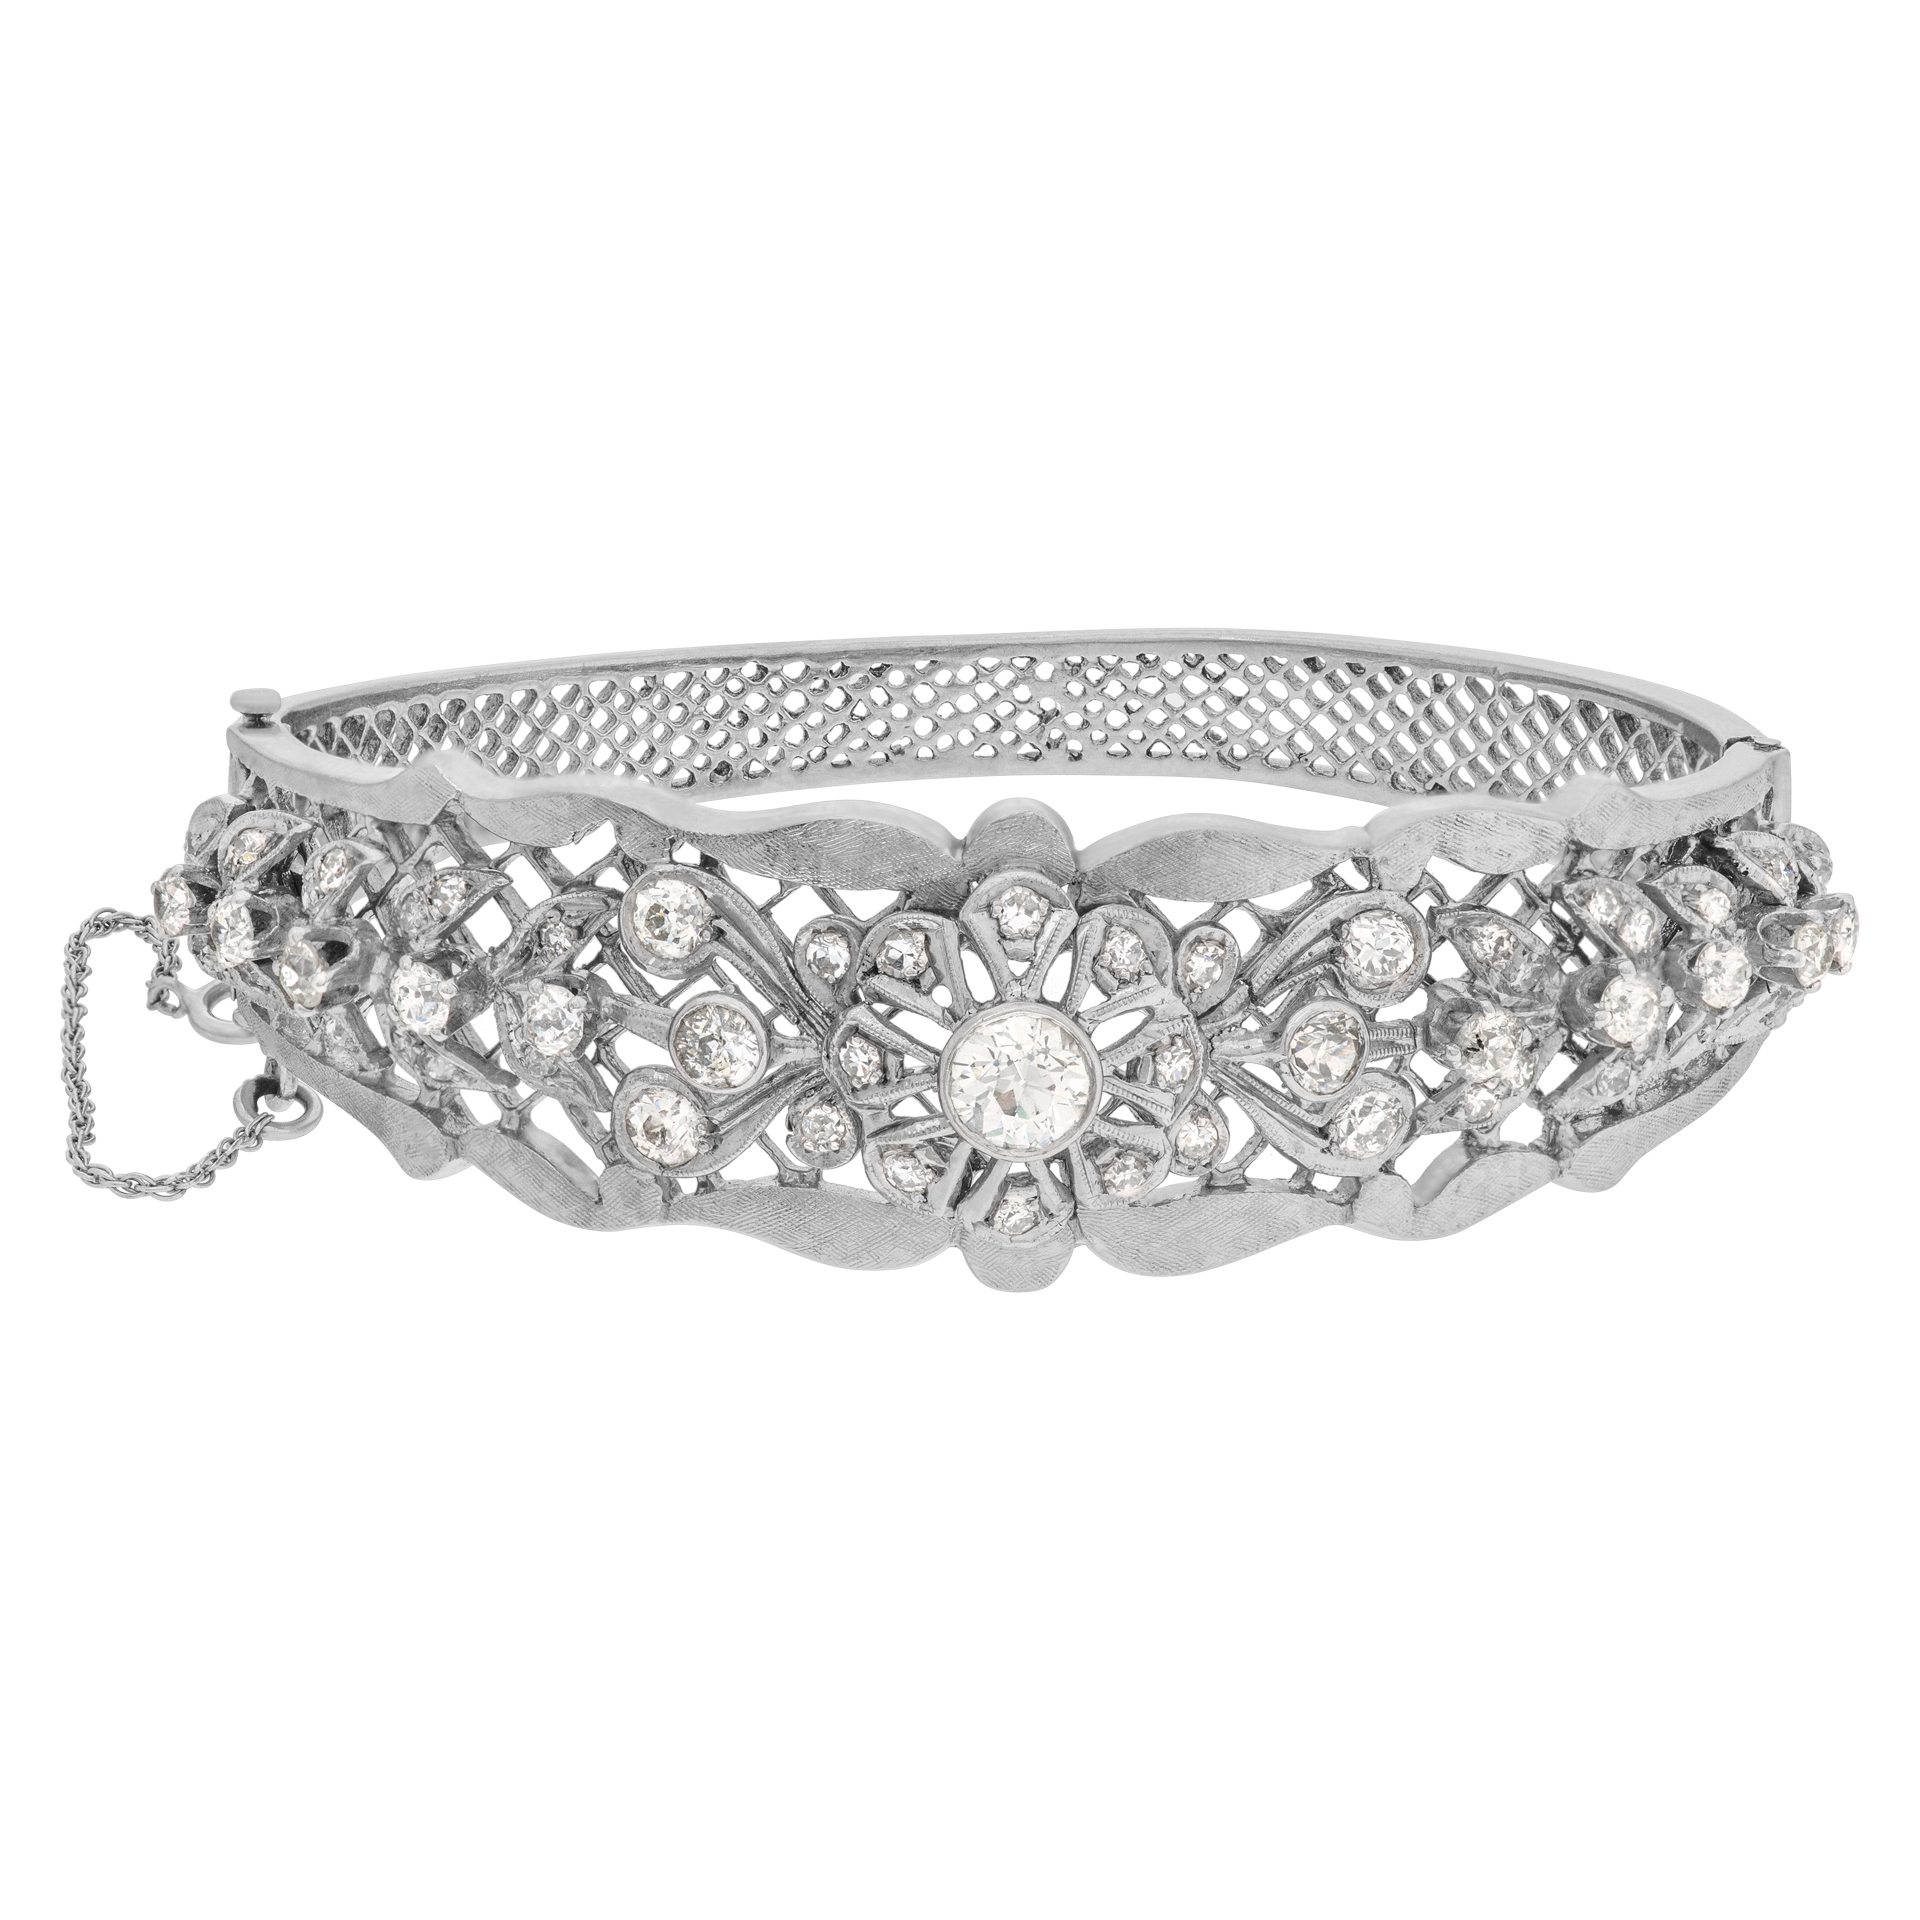 Diamond bangle with approximately .70 carat in center and appr. 2 carats in surrounding diamonds in  14k white gold image 1